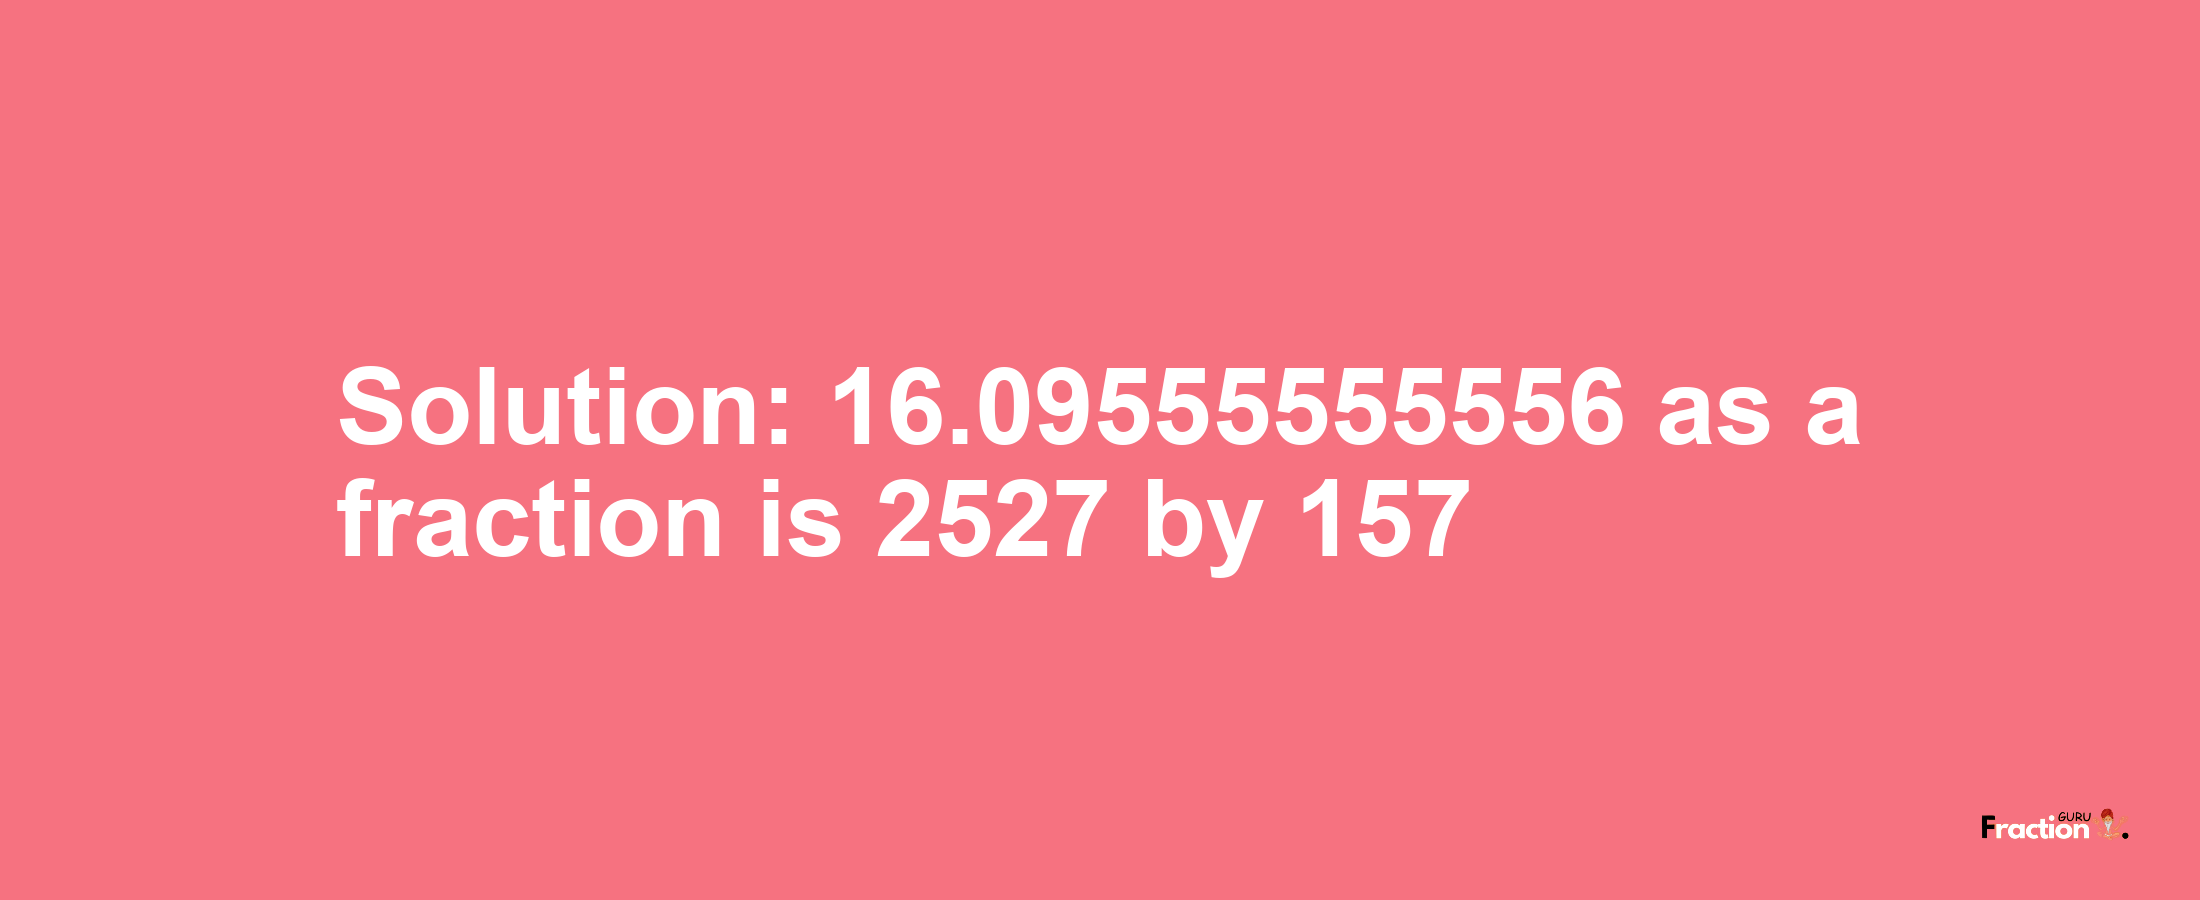 Solution:16.09555555556 as a fraction is 2527/157